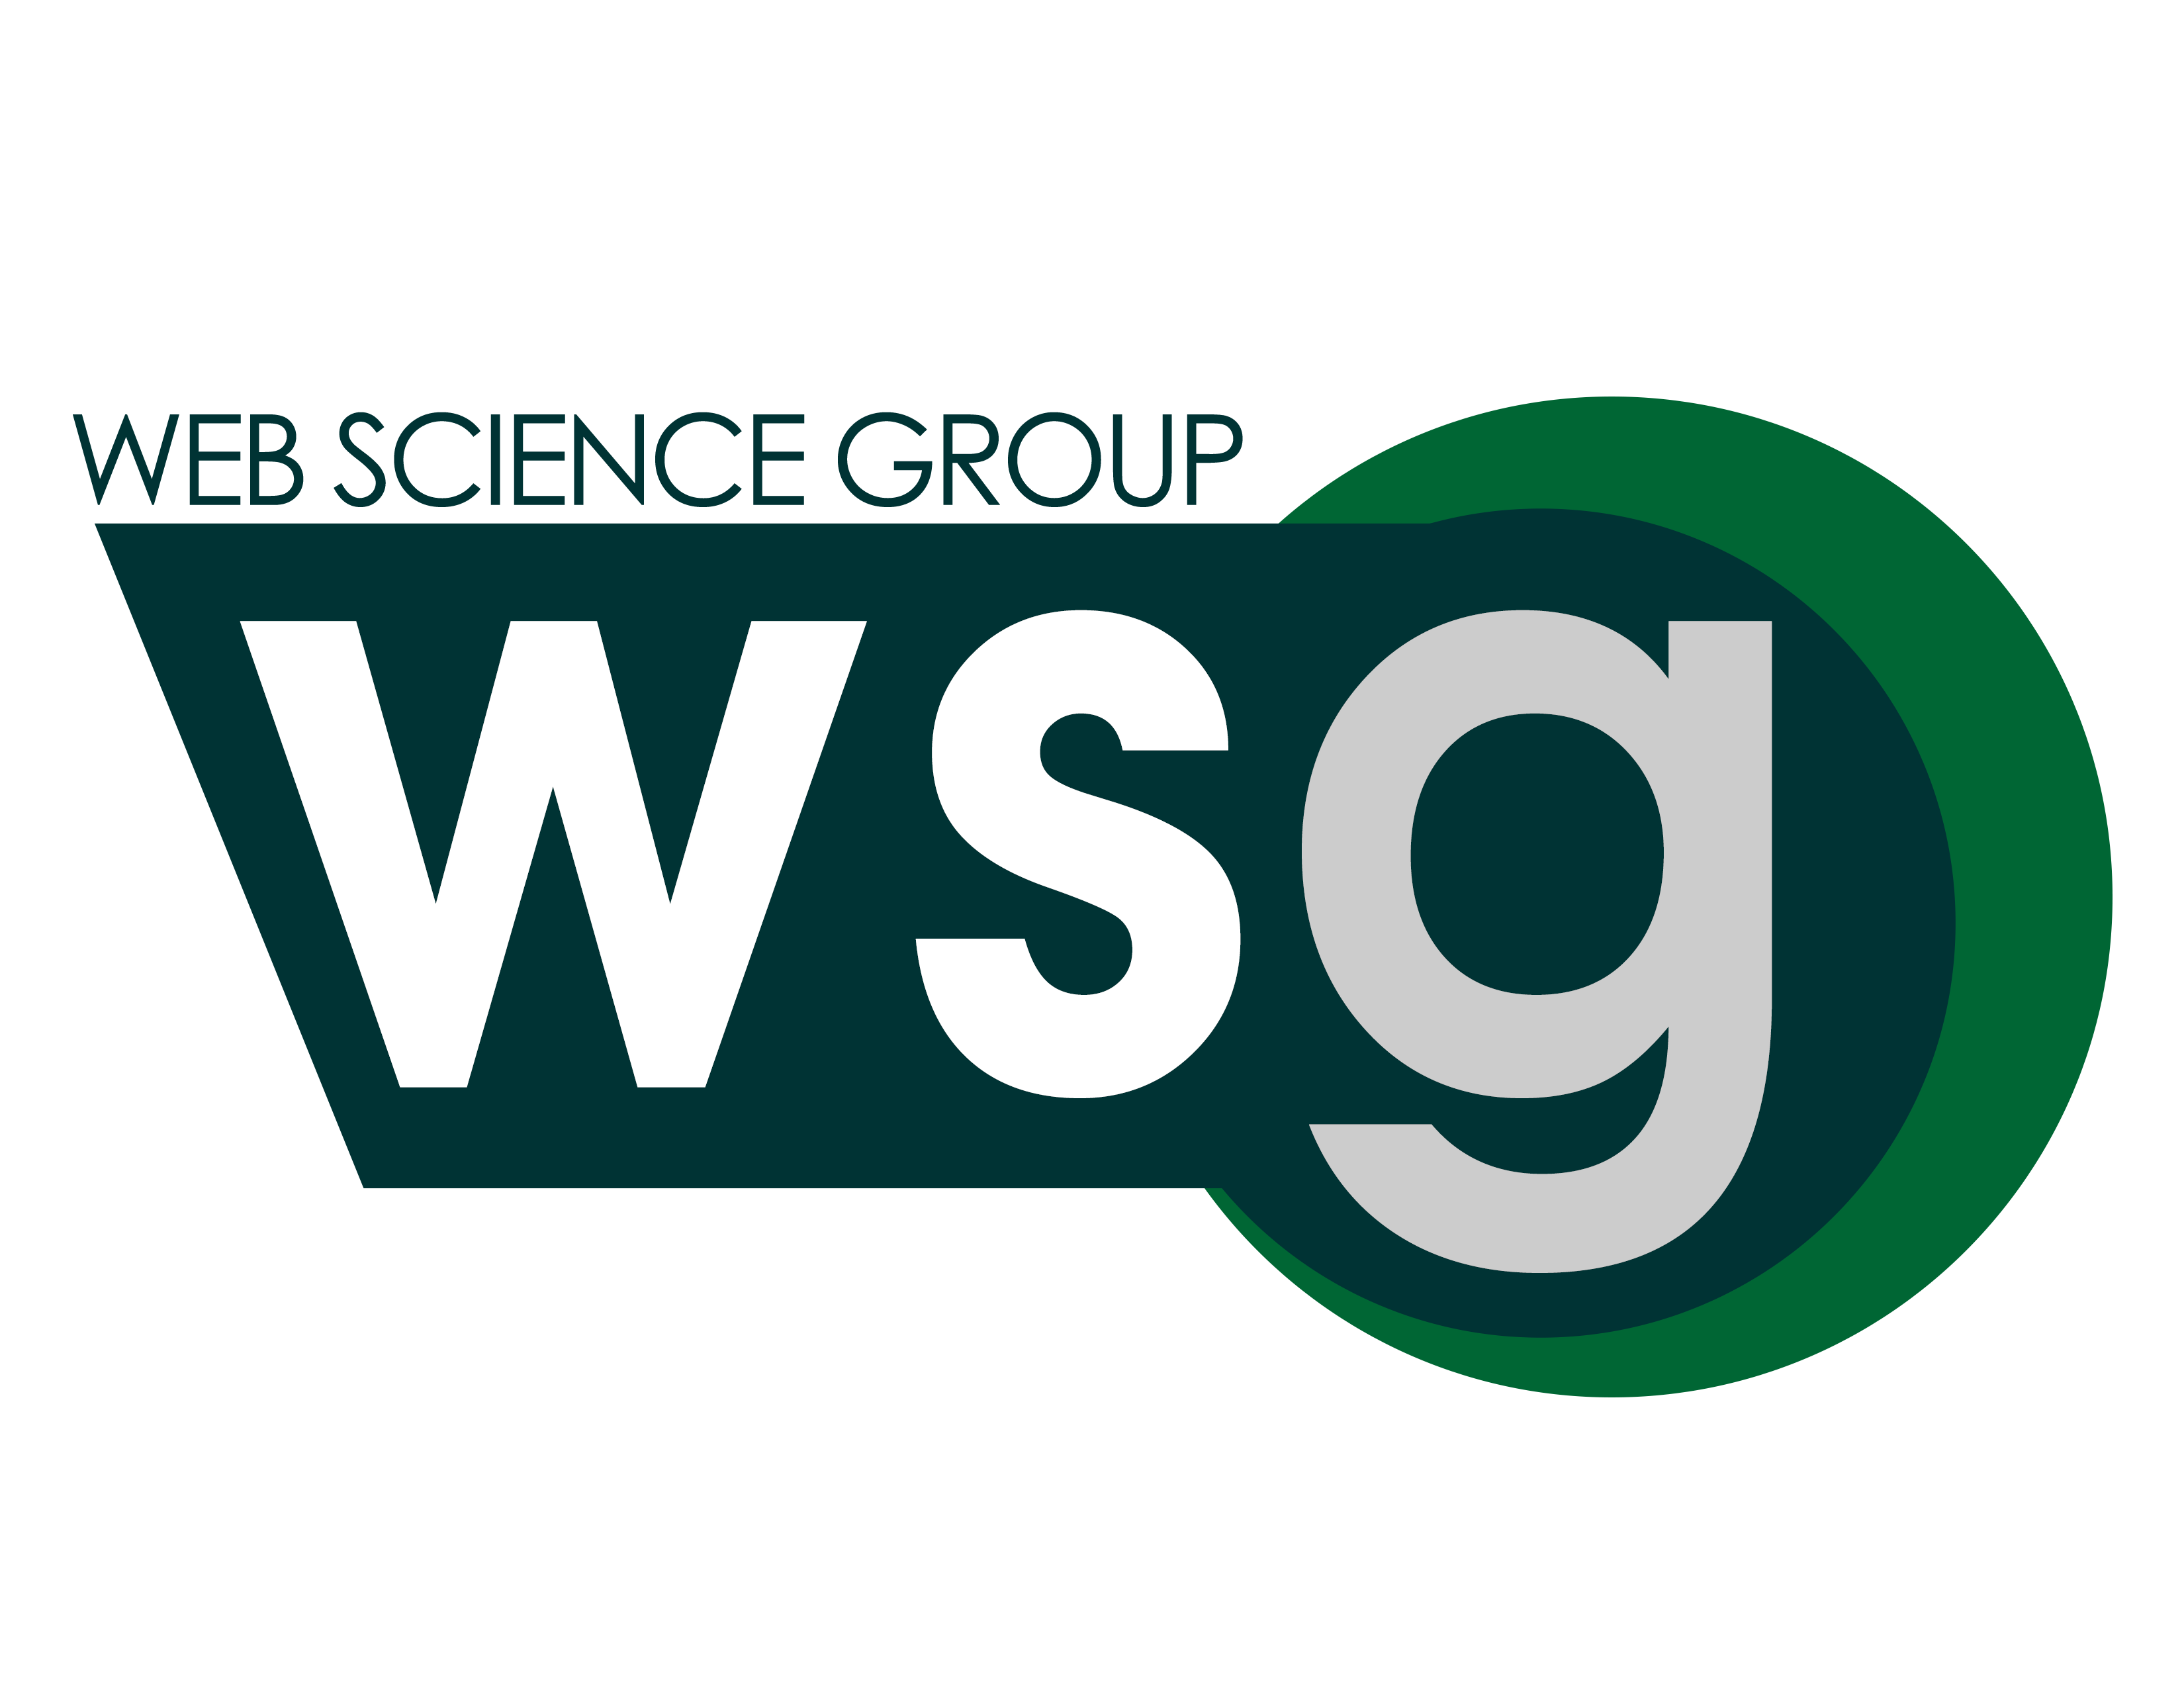 Web Science Group